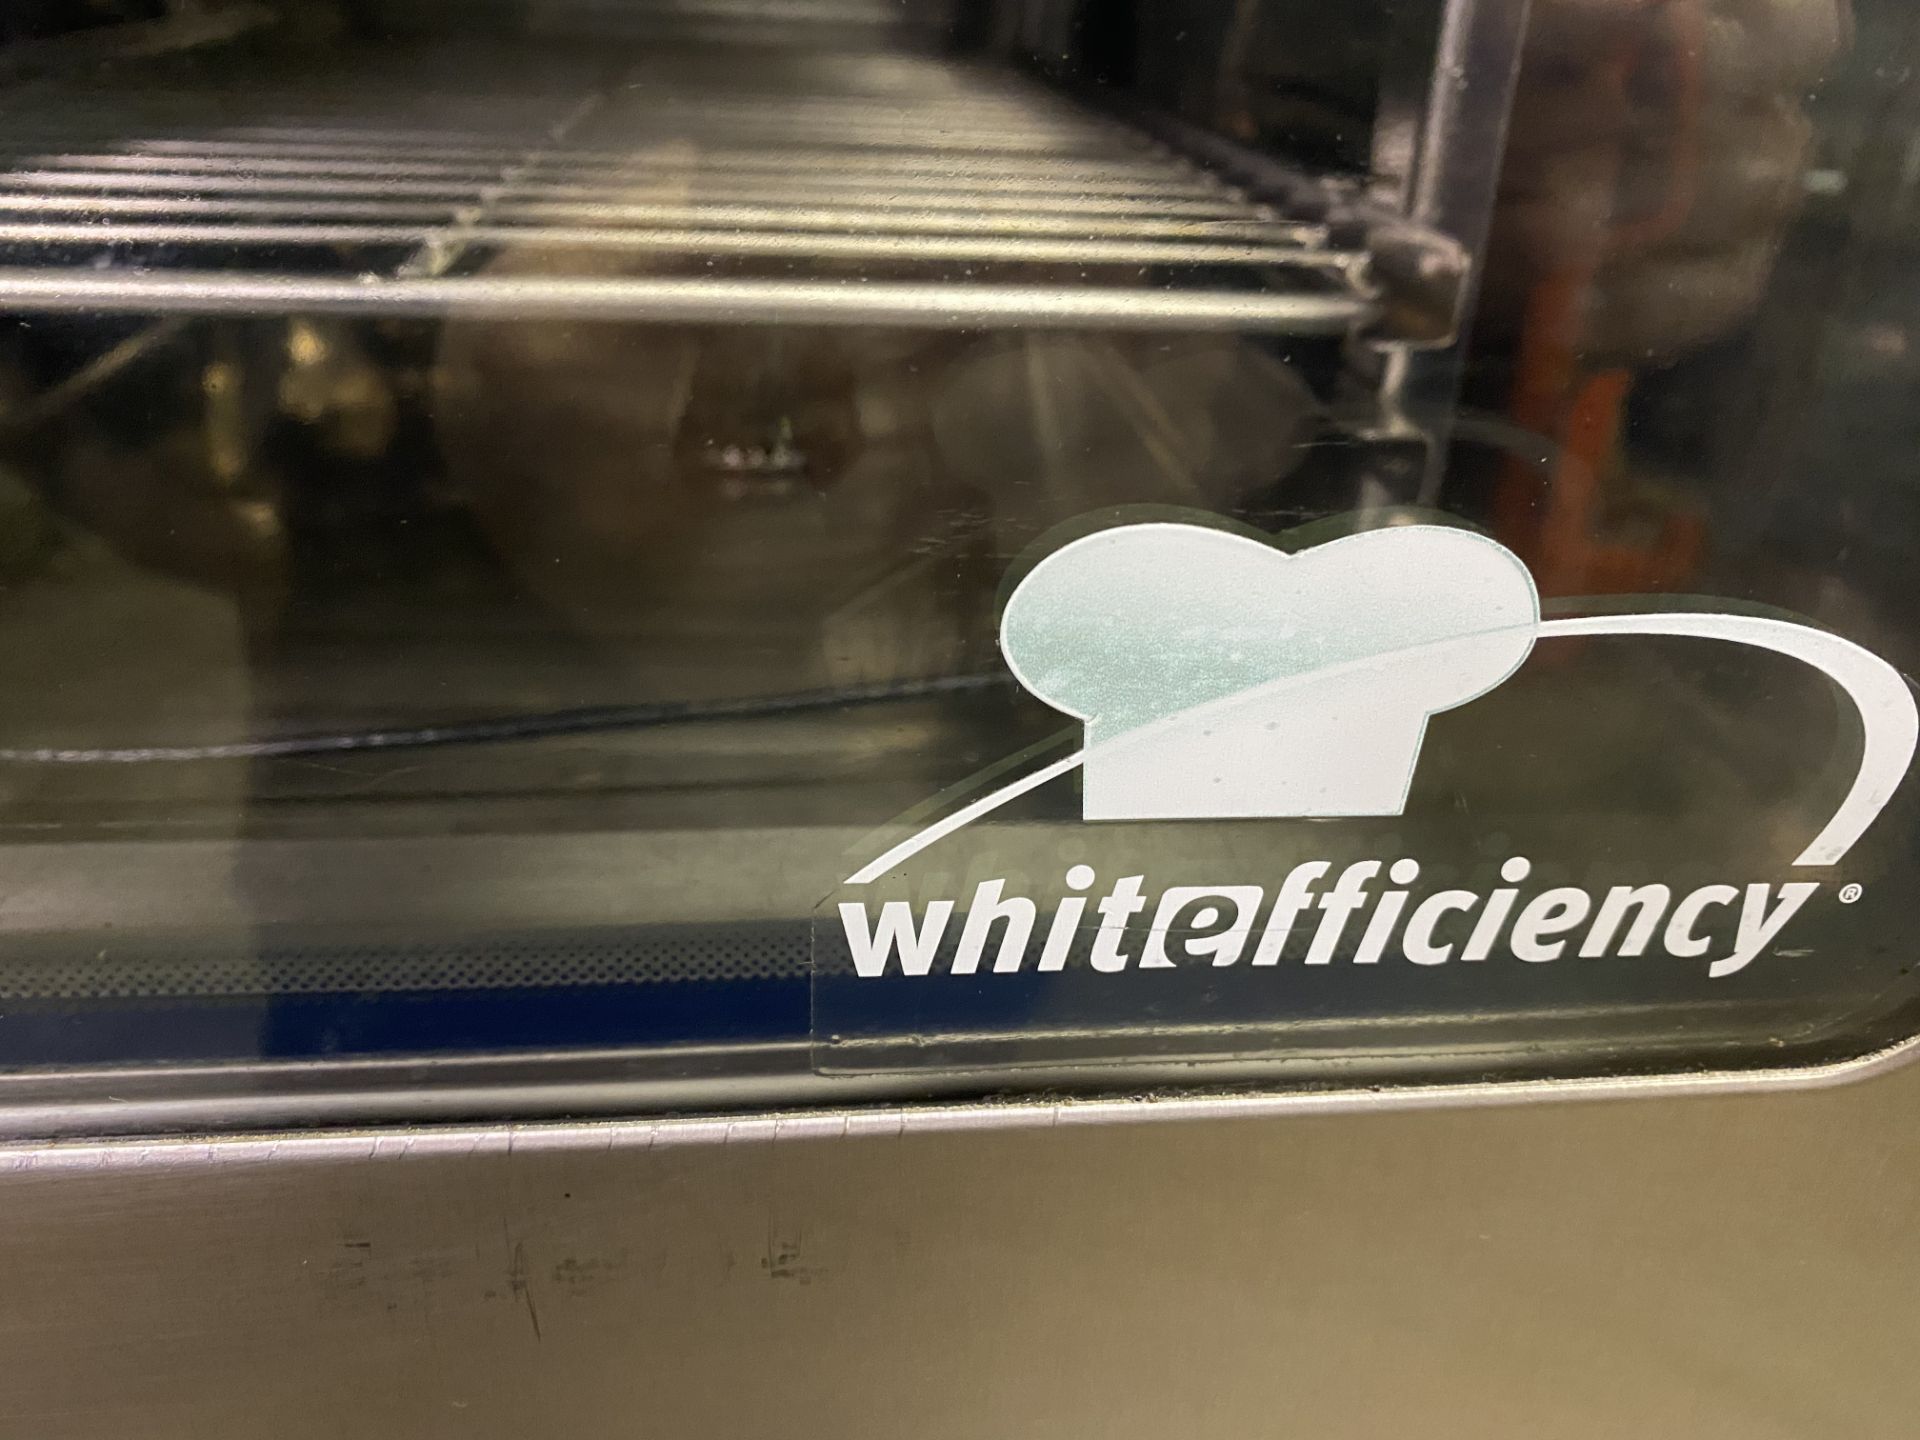 Rational White Efficiency 6 Grid Combi Steamer on Stand - Image 11 of 11